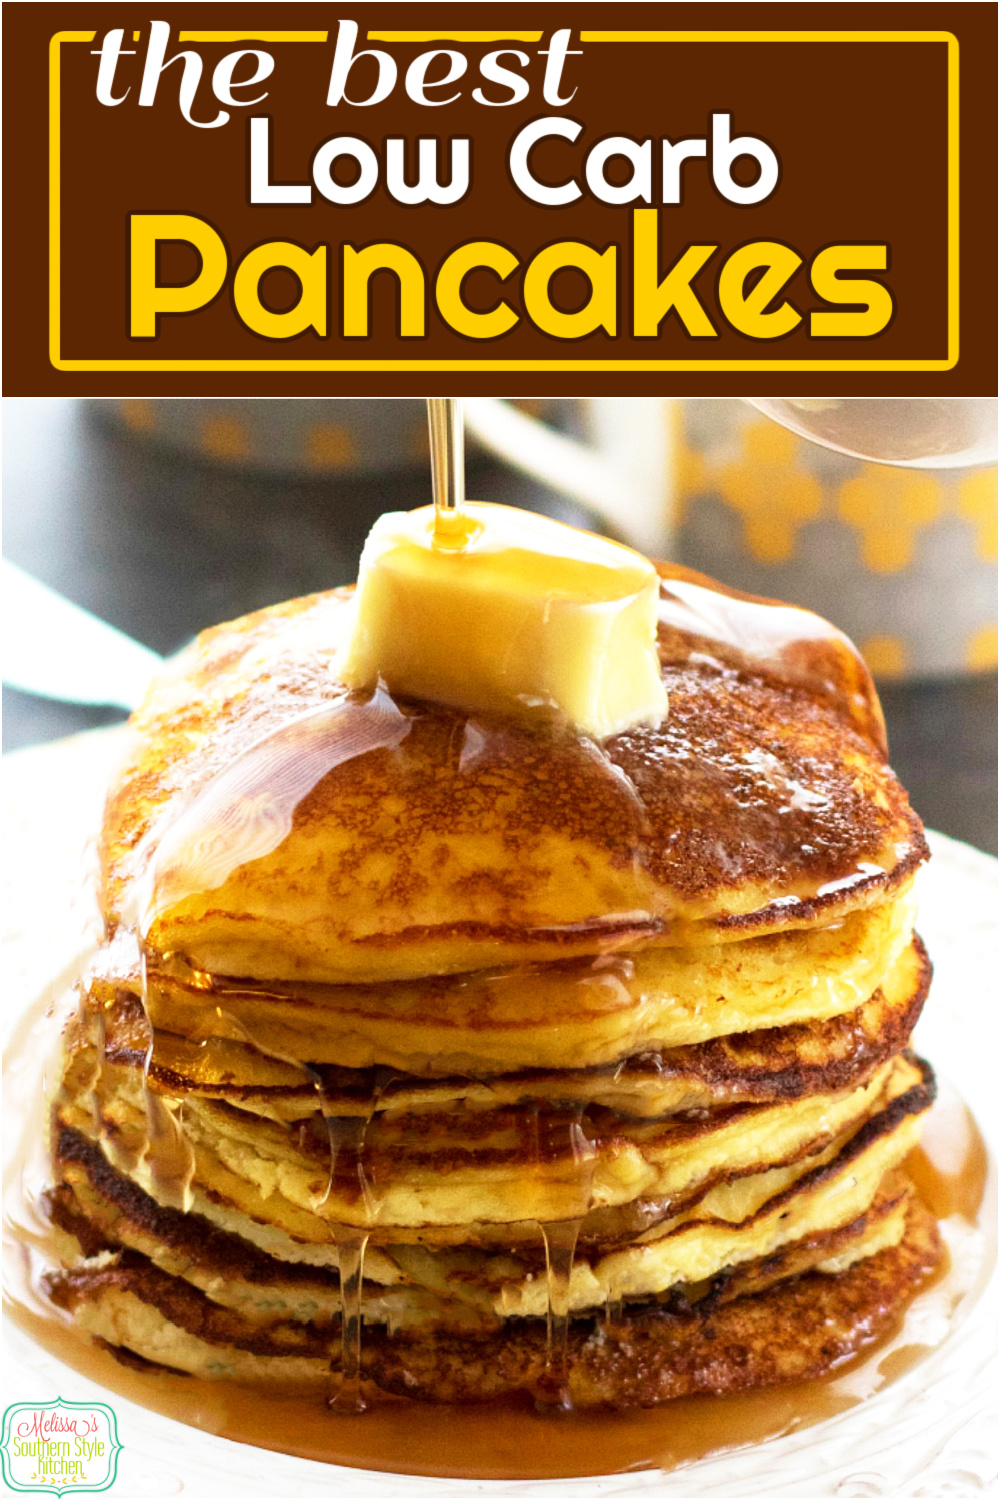 Leave the guilt behind and enjoy a big stack of these fluffy almond flour Low Carb Pancakes #lowcarb #pancakes #lowcarbpancakes #almondflourpancakes #almondflourrecipes #glutenfreerecipes #southernfood #southernrecipes via @melissasssk